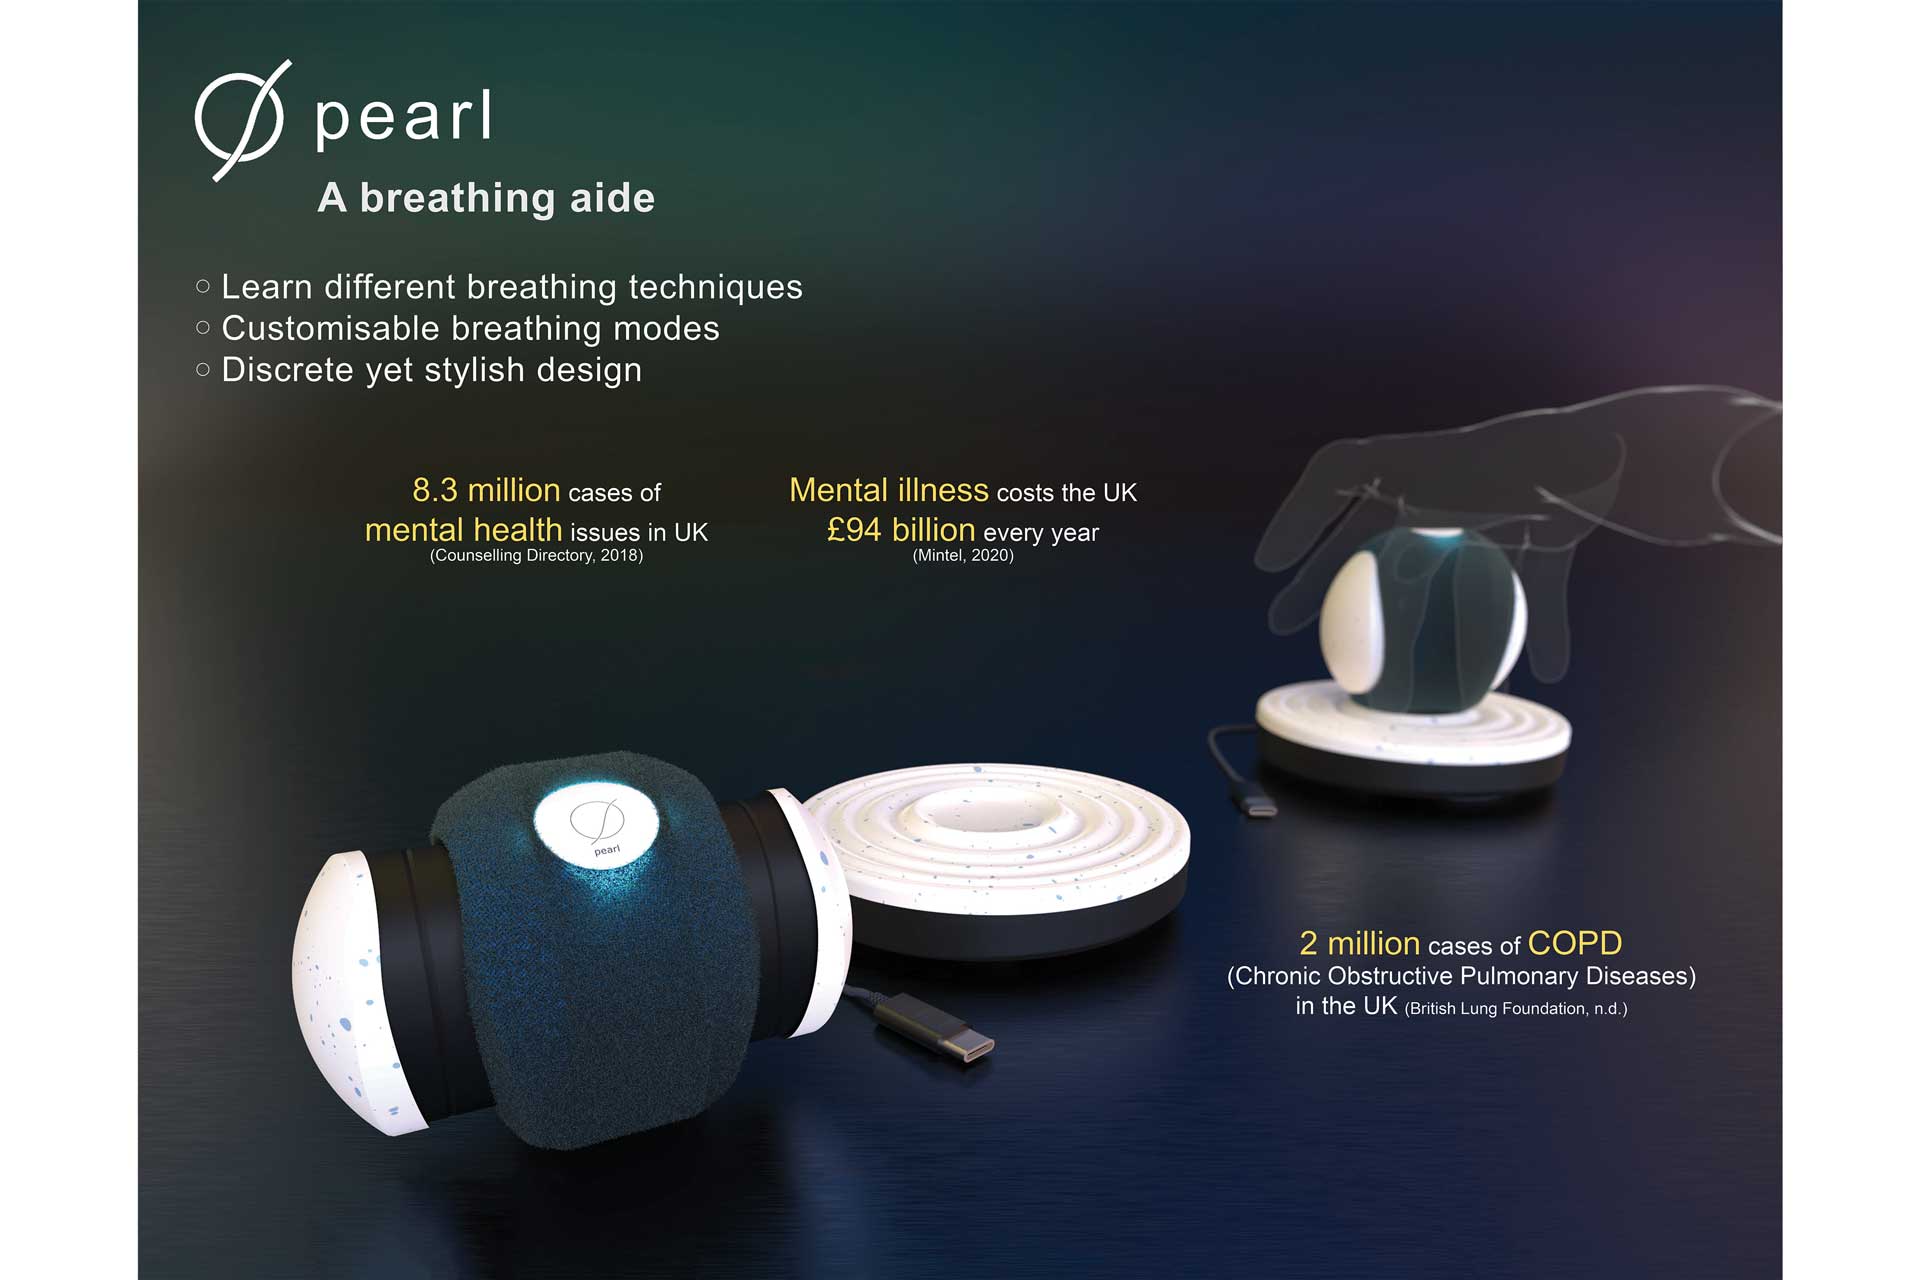 Concepts and renders of a breathing aid called Pearl by Muhammad Dawood